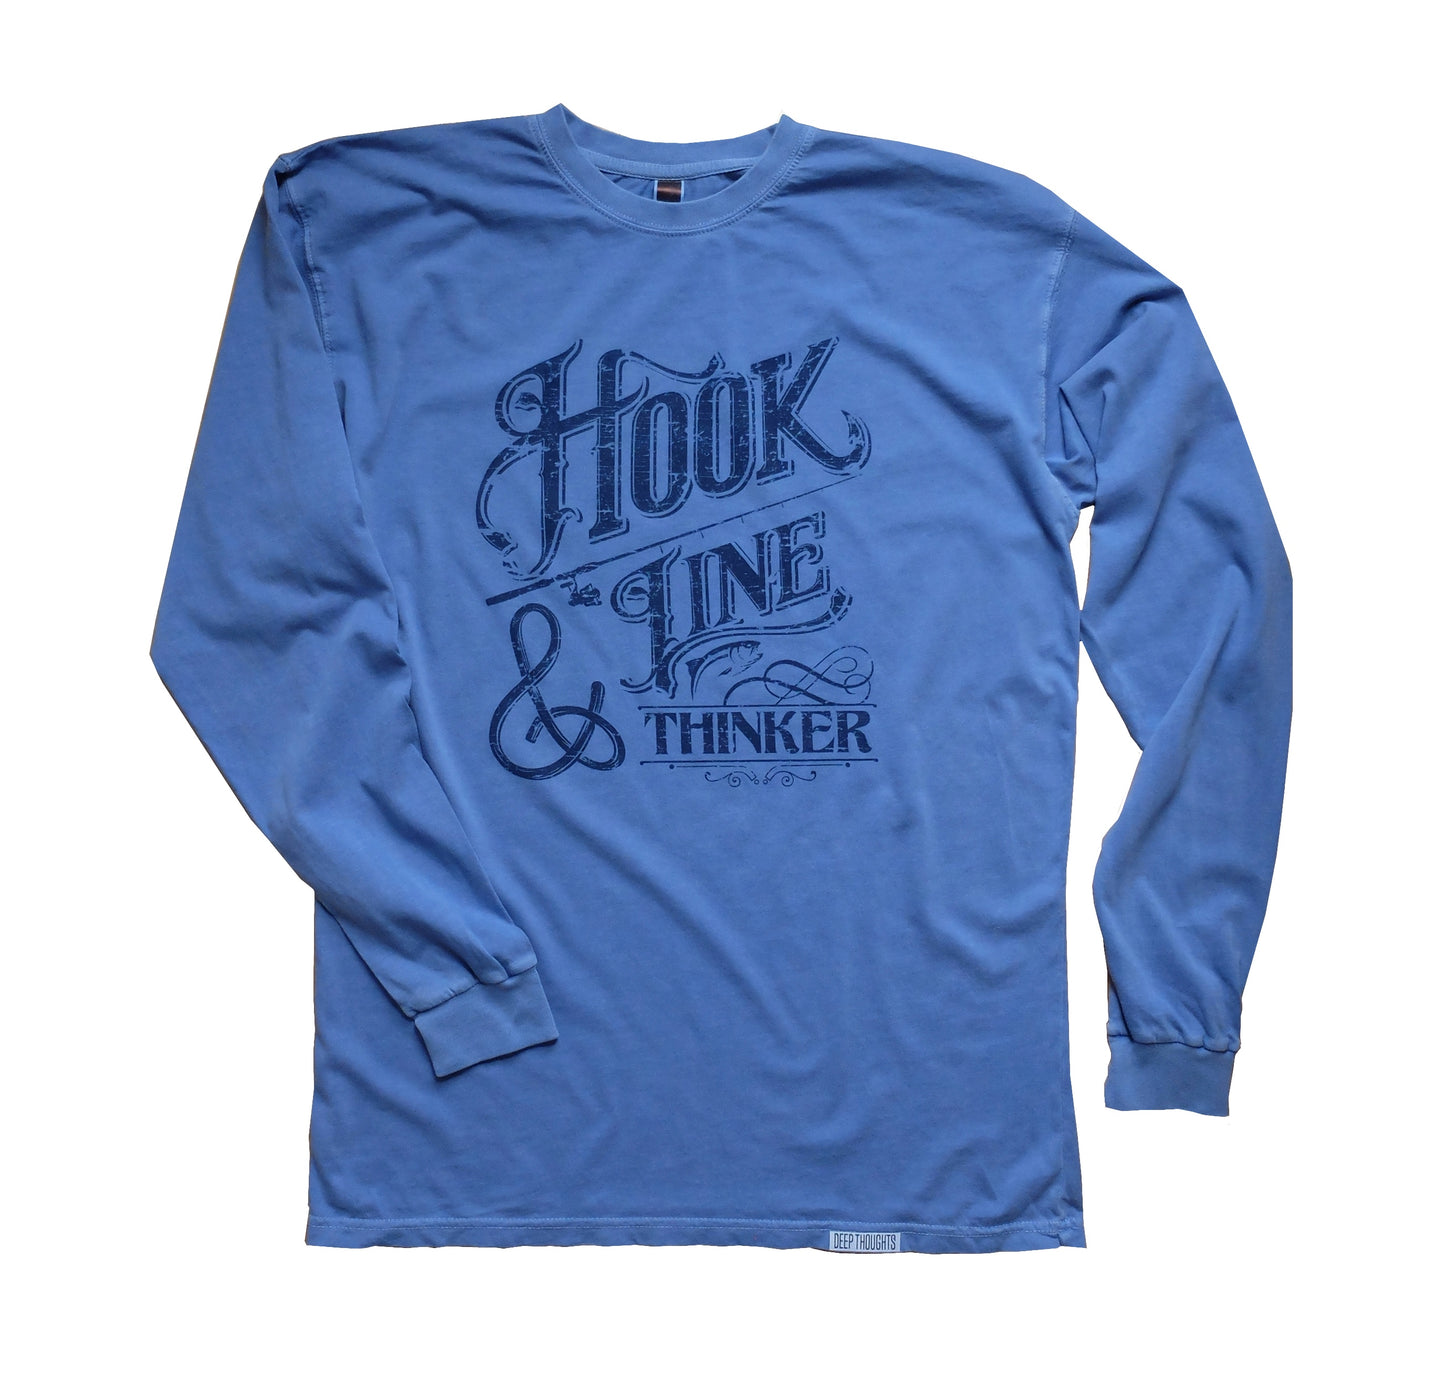 washed blue long sleeve cotton t-shirt with navy blue hook line and thinker fishing graphic